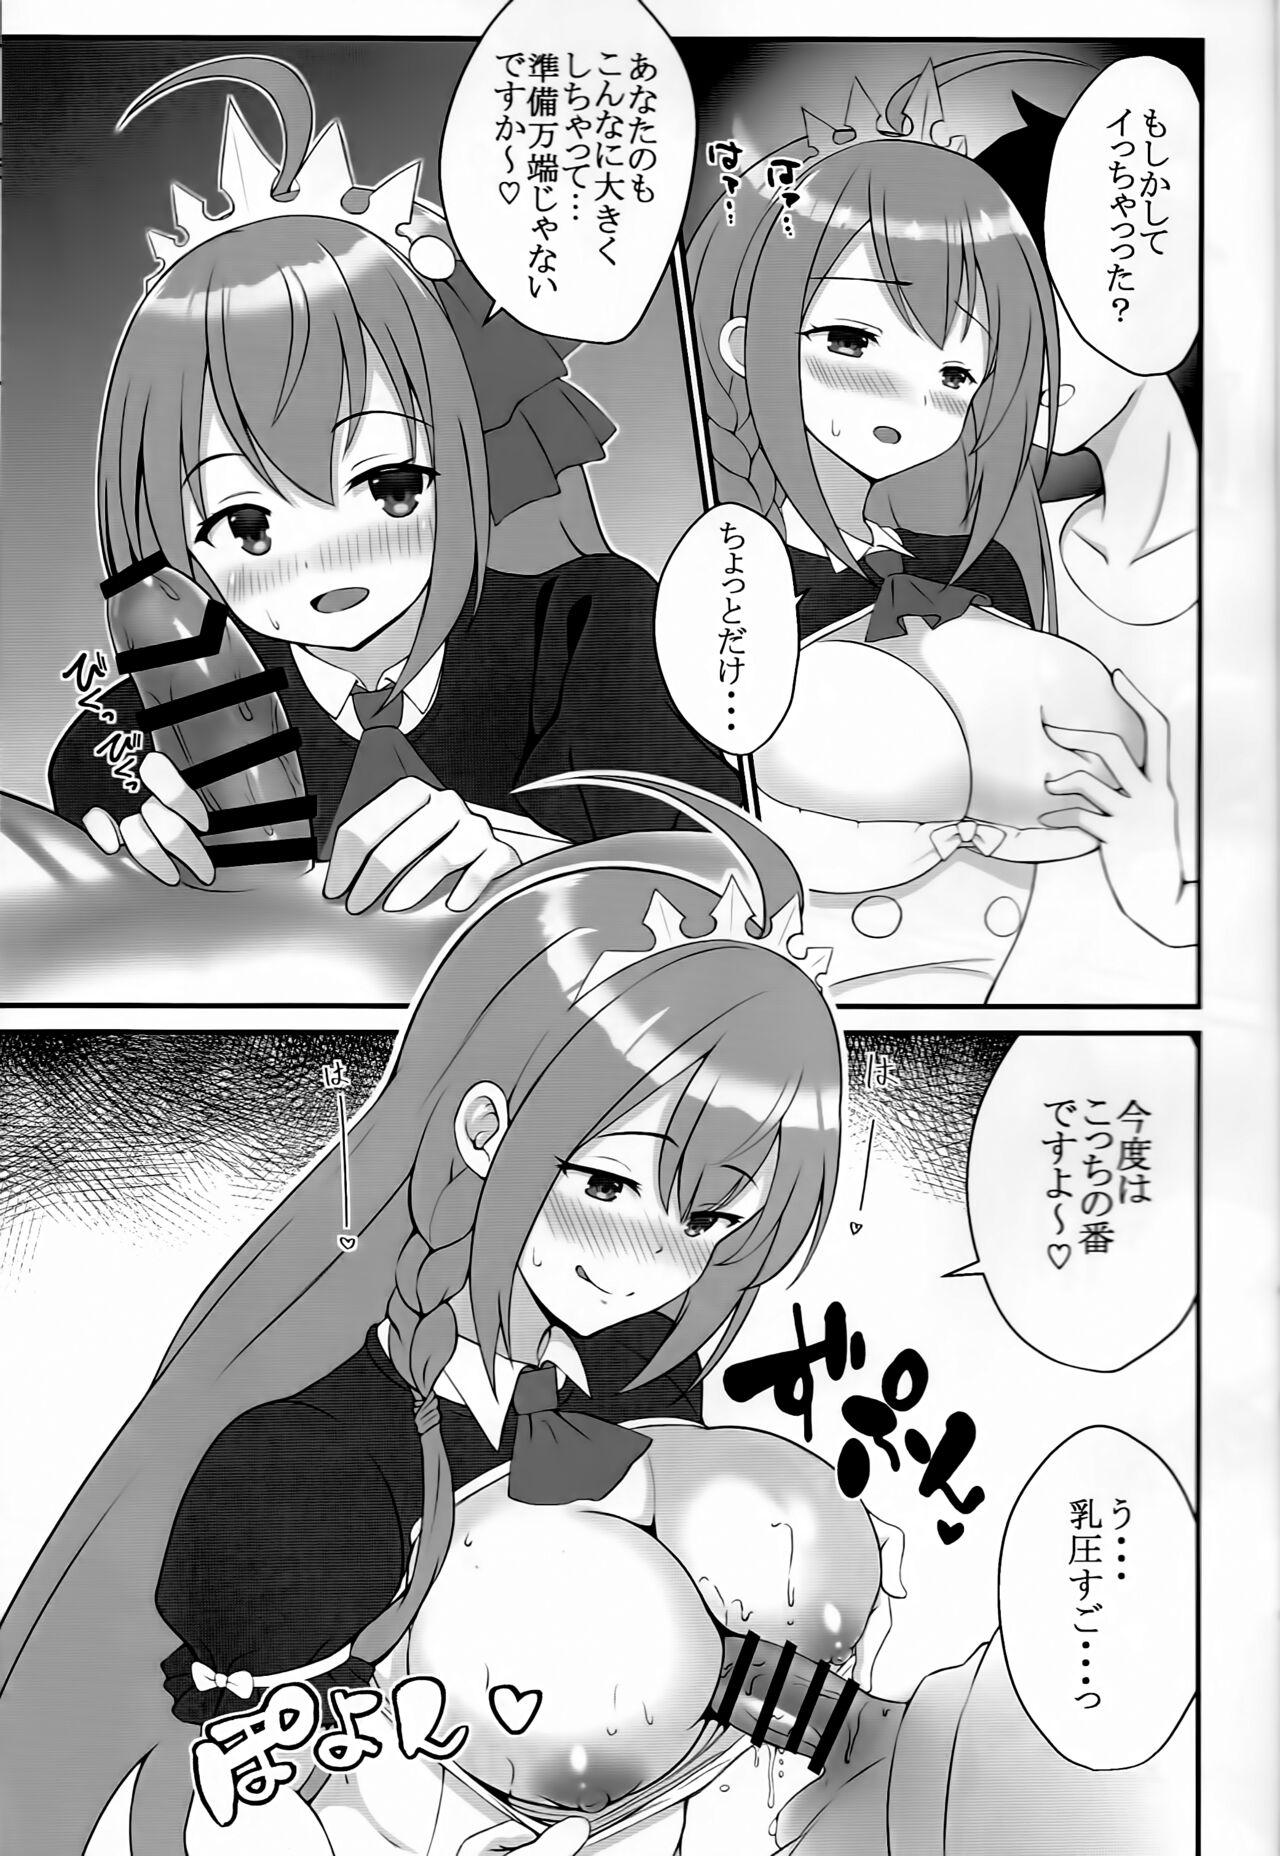 Gay Shaved Pecorine no Holiday - Princess connect Free Amature - Page 4